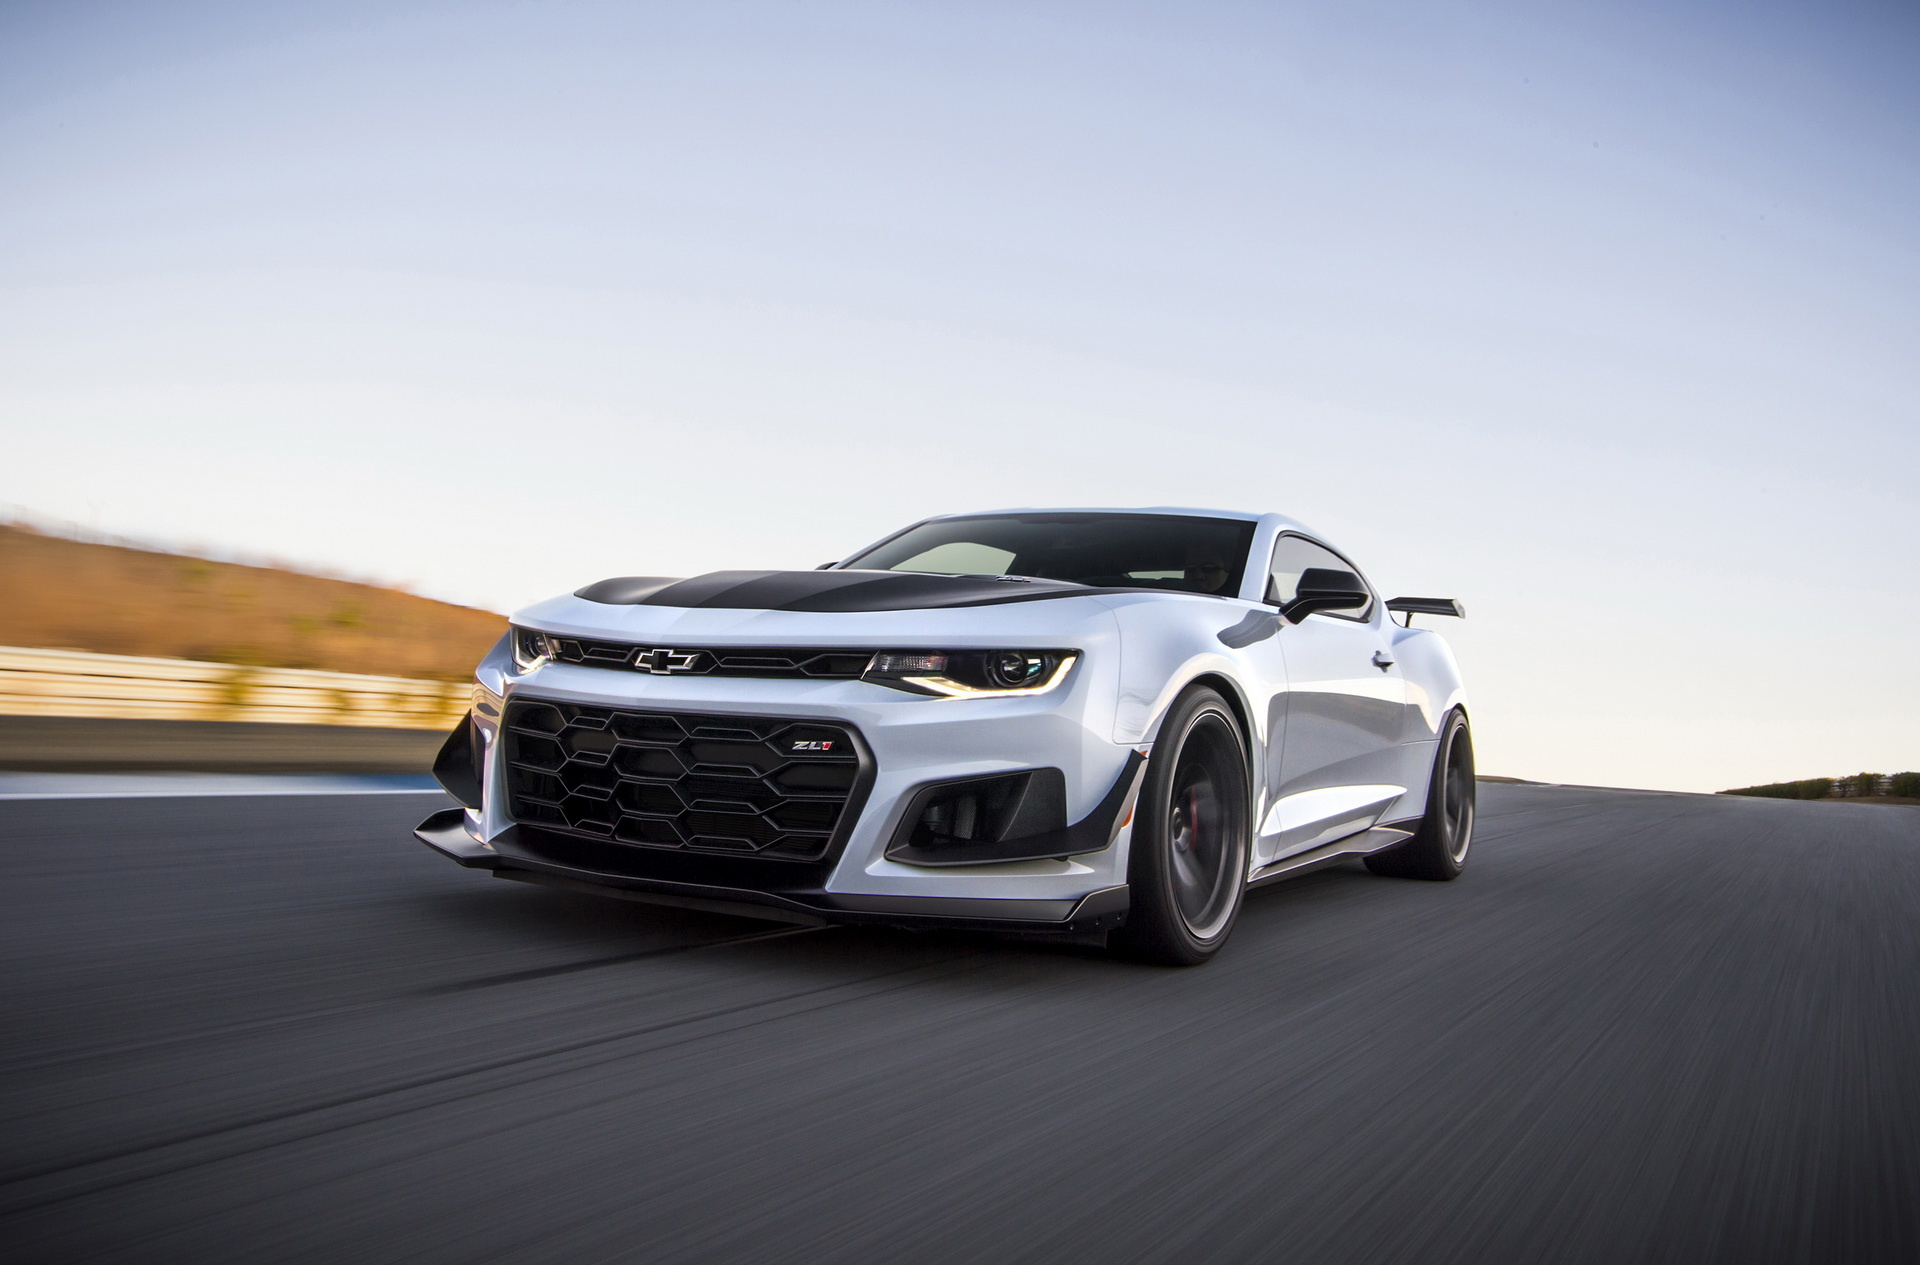 2019 Chevrolet Camaro ZL1 1LE, Old face with new features, 10-speed auto option, Classic design with modern touches, High-performance version, 1920x1270 HD Desktop